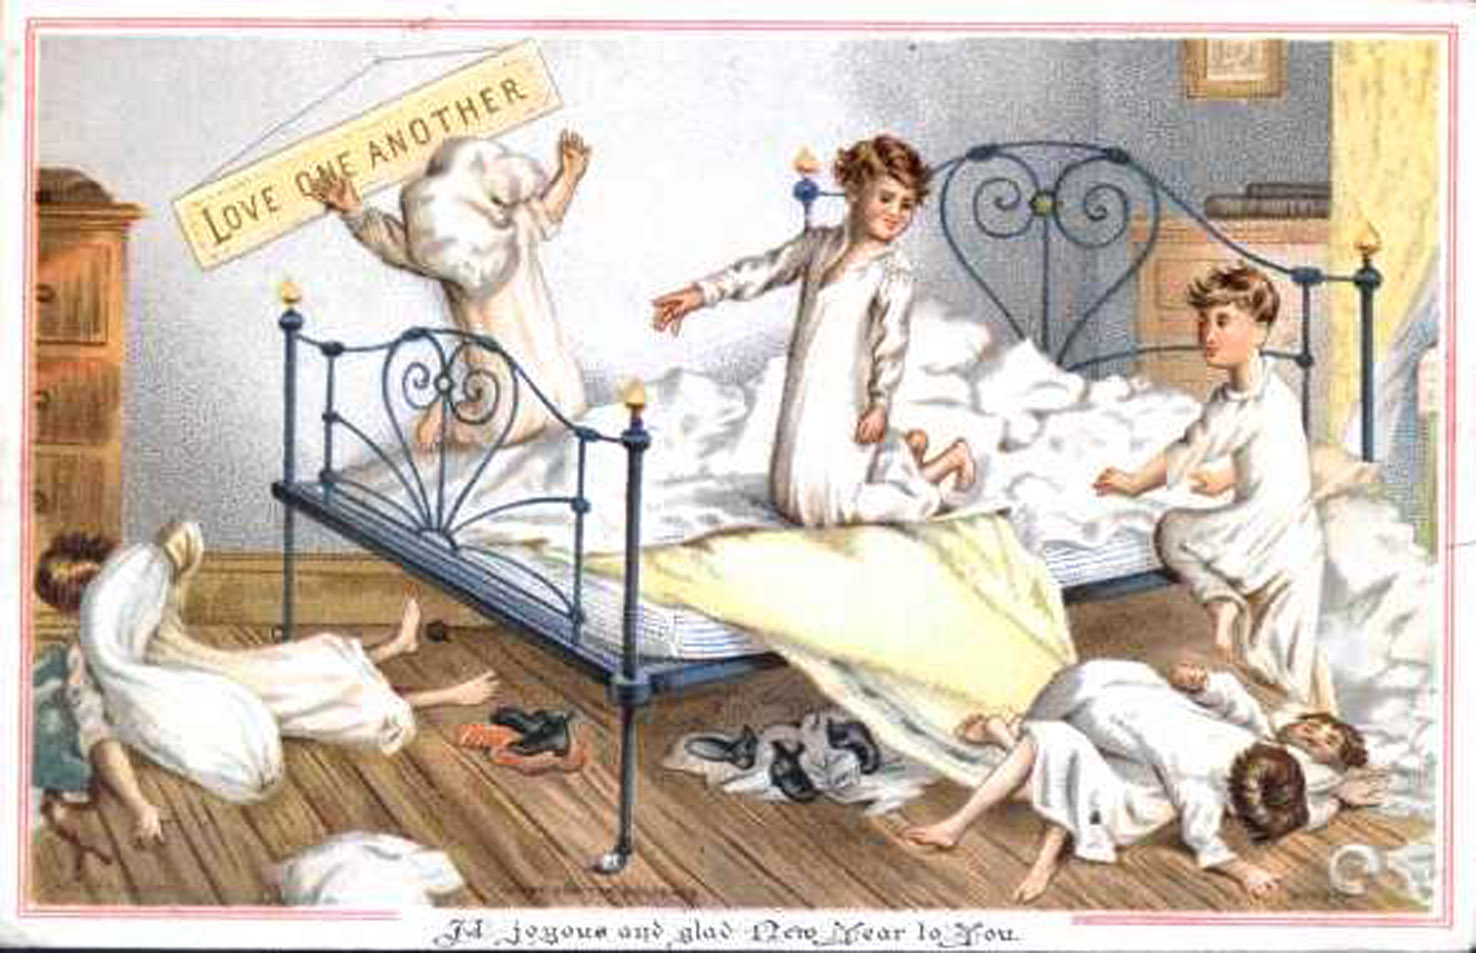 Boys in bedroom 1881 - No 03 in series of four amusing vintage Christmas cards